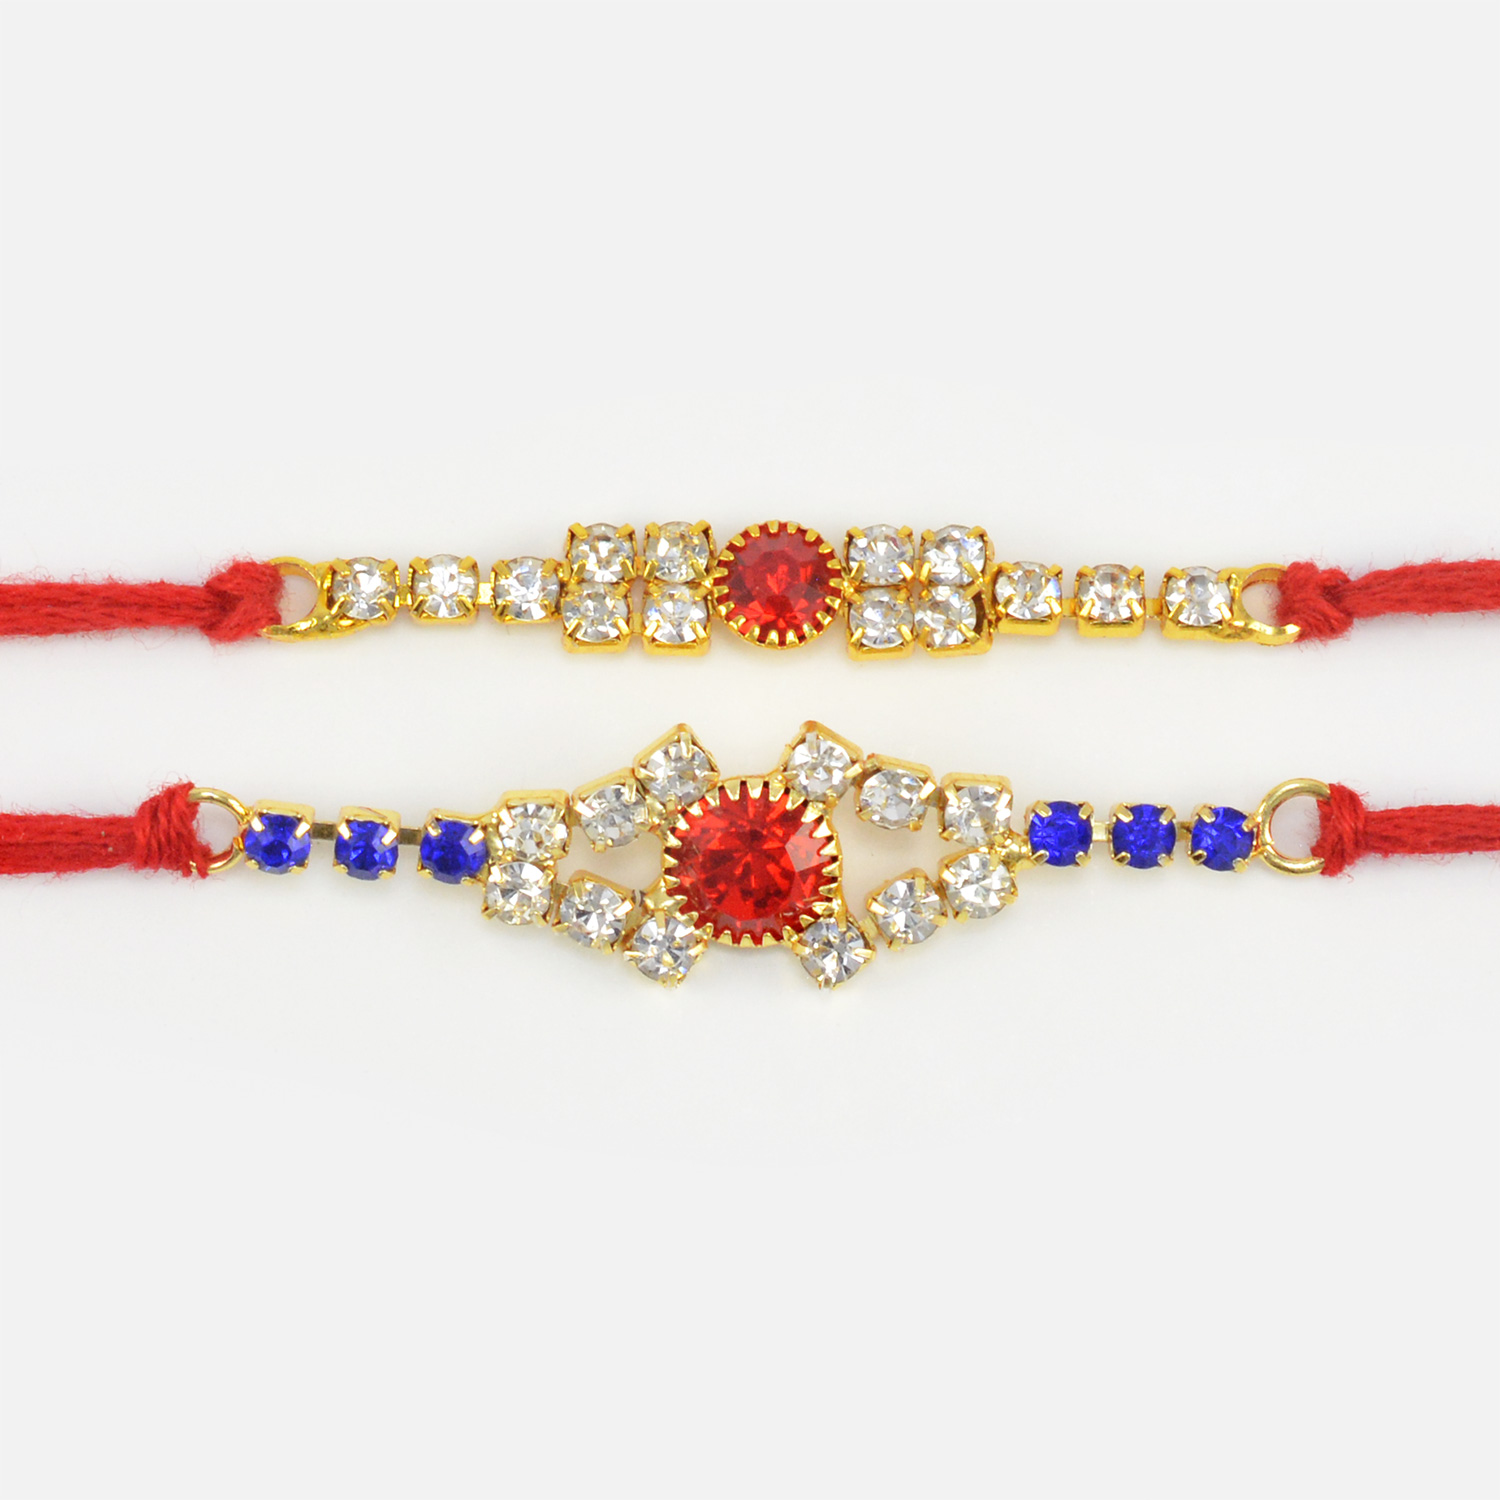 Rhombus Shape Blue and Transparent Jewel Studded Two Magnificent Rakhi Set for 2 Brothers